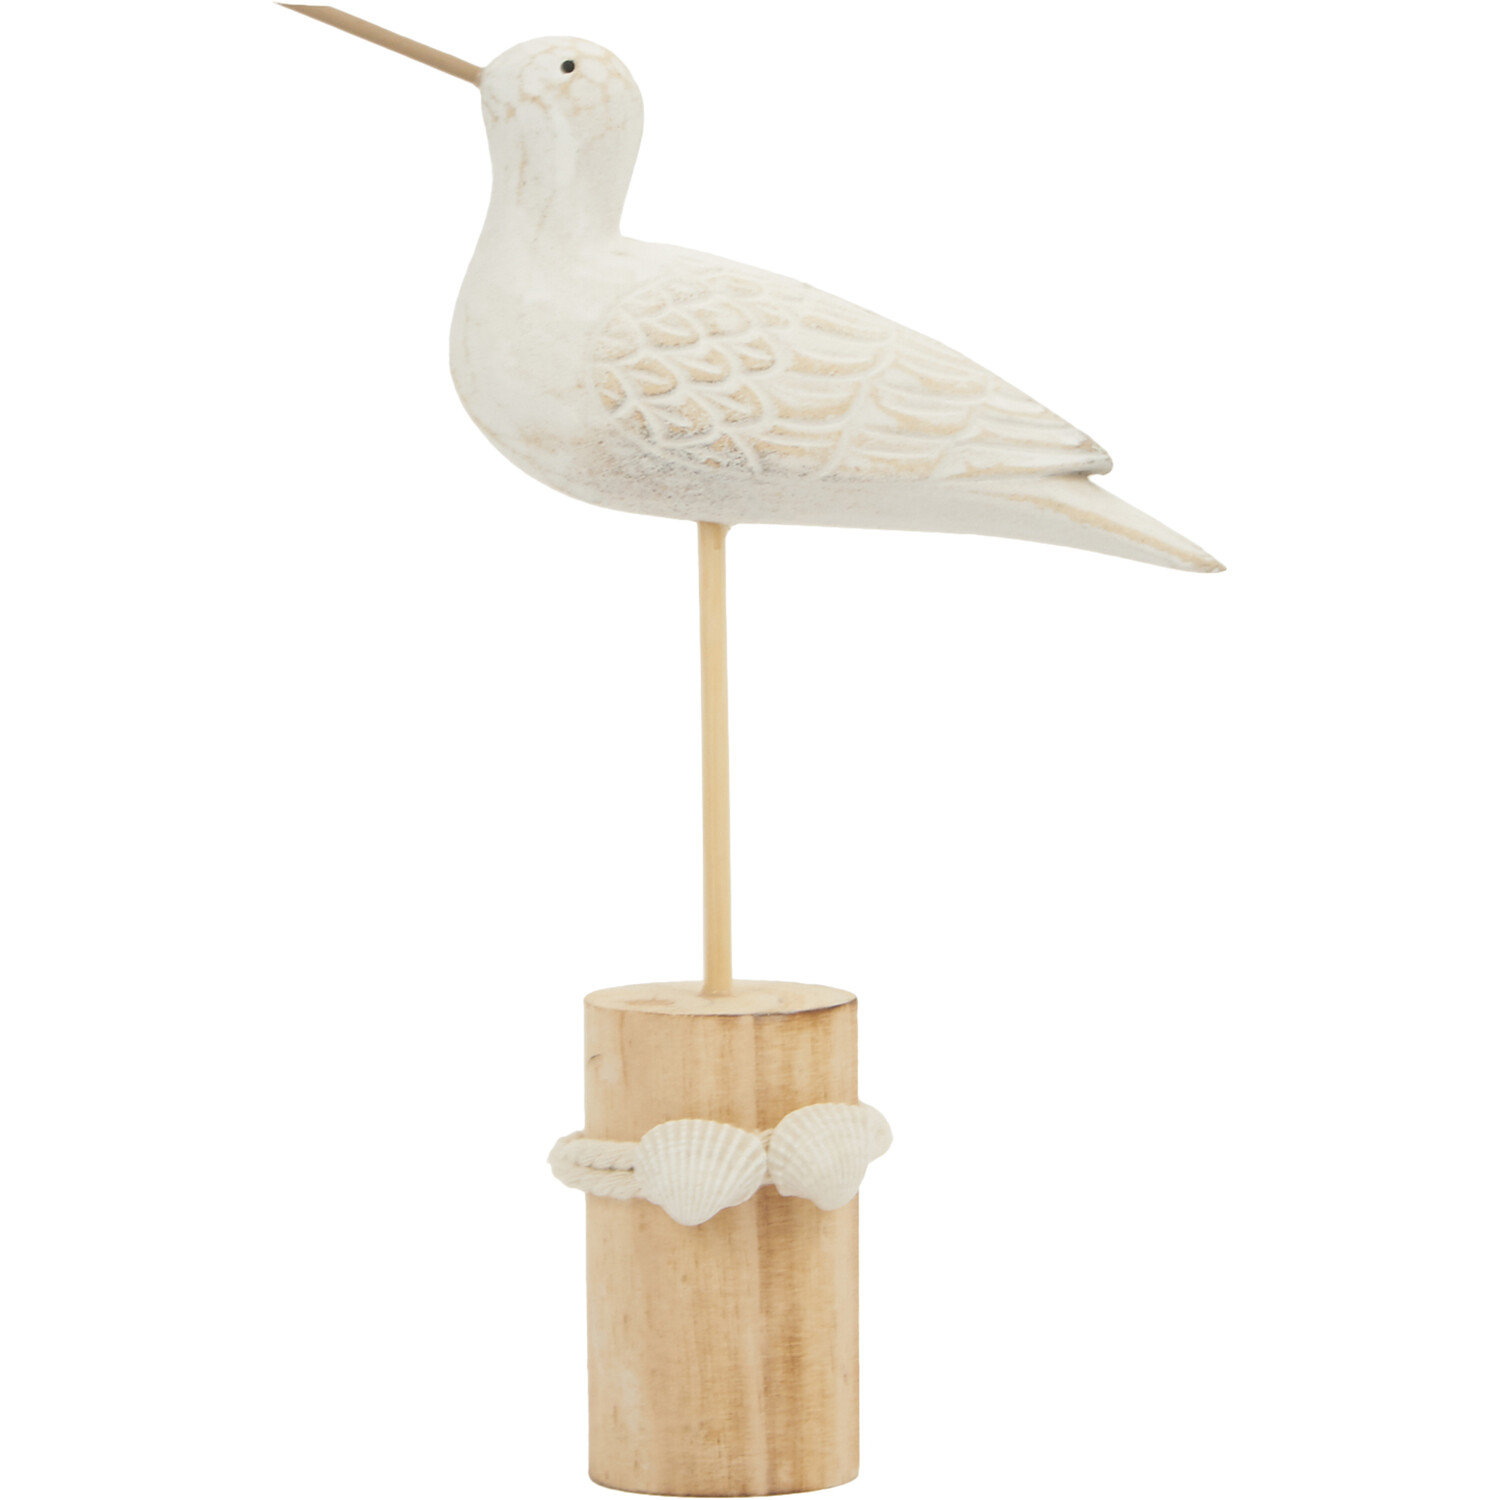 Wooden Seagull - White Image 1